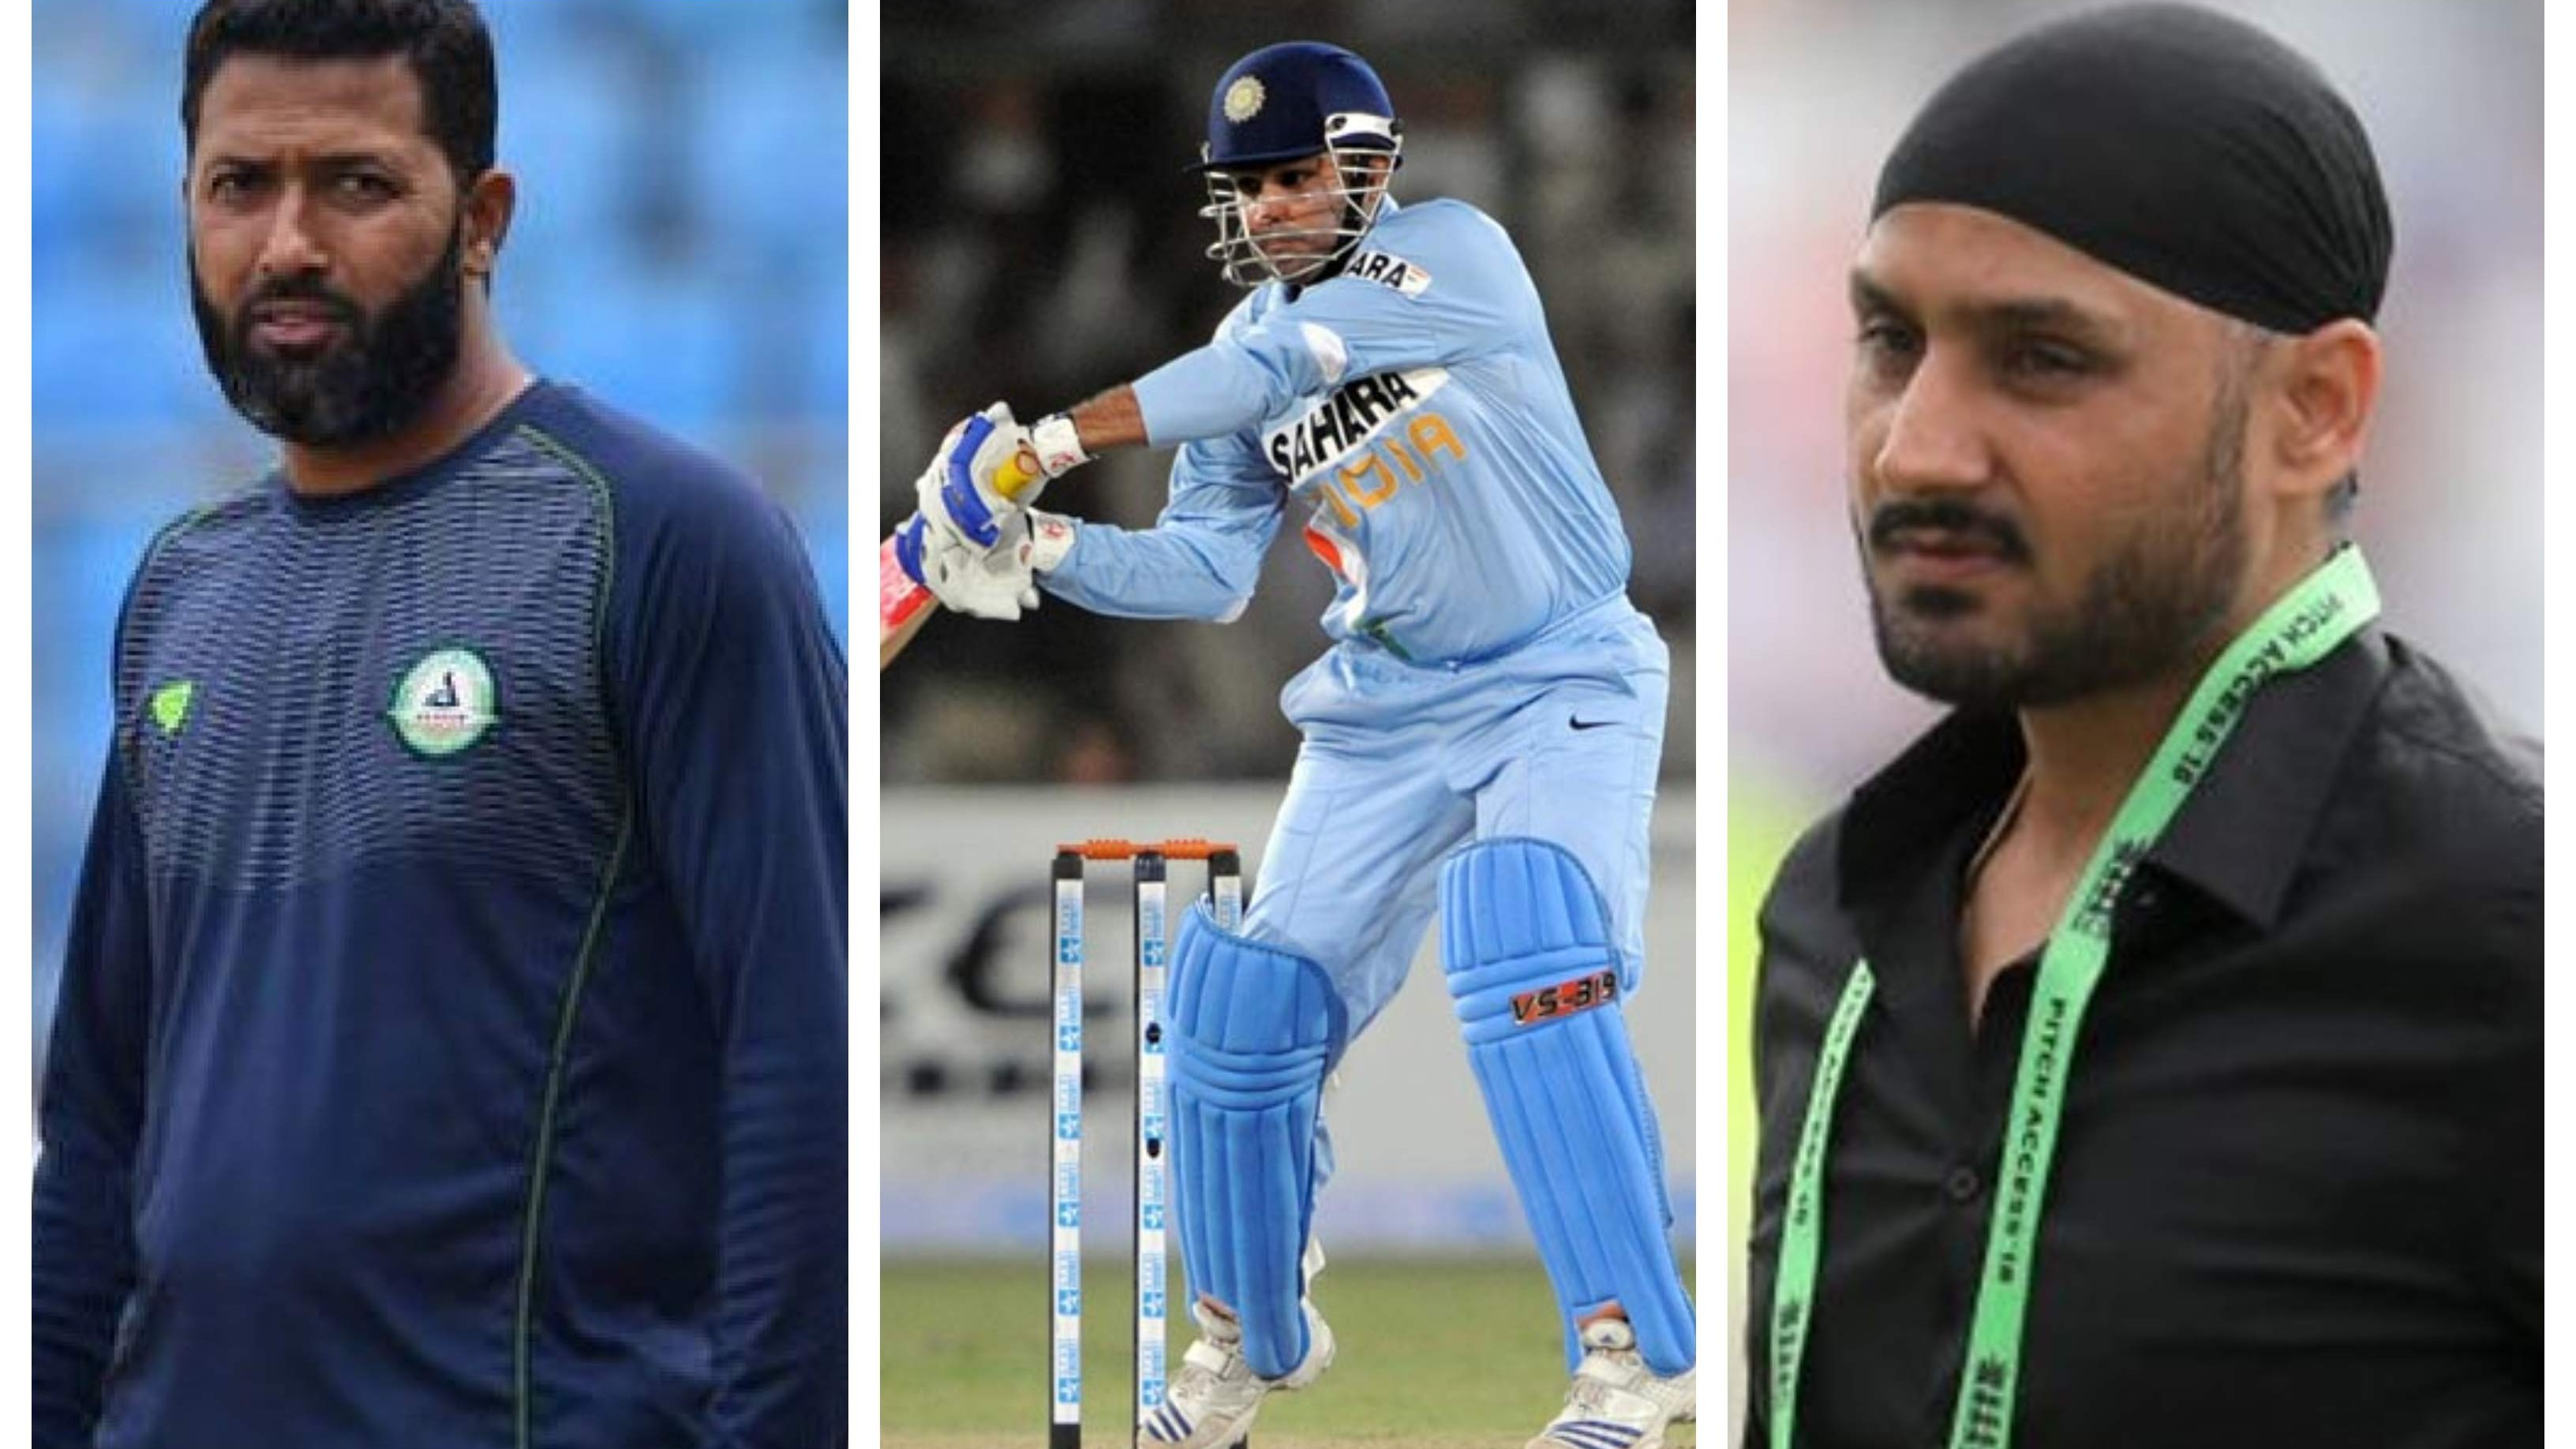 Harbhajan objects to Sehwag's exclusion from Wasim Jaffer’s all-time India ODI XI